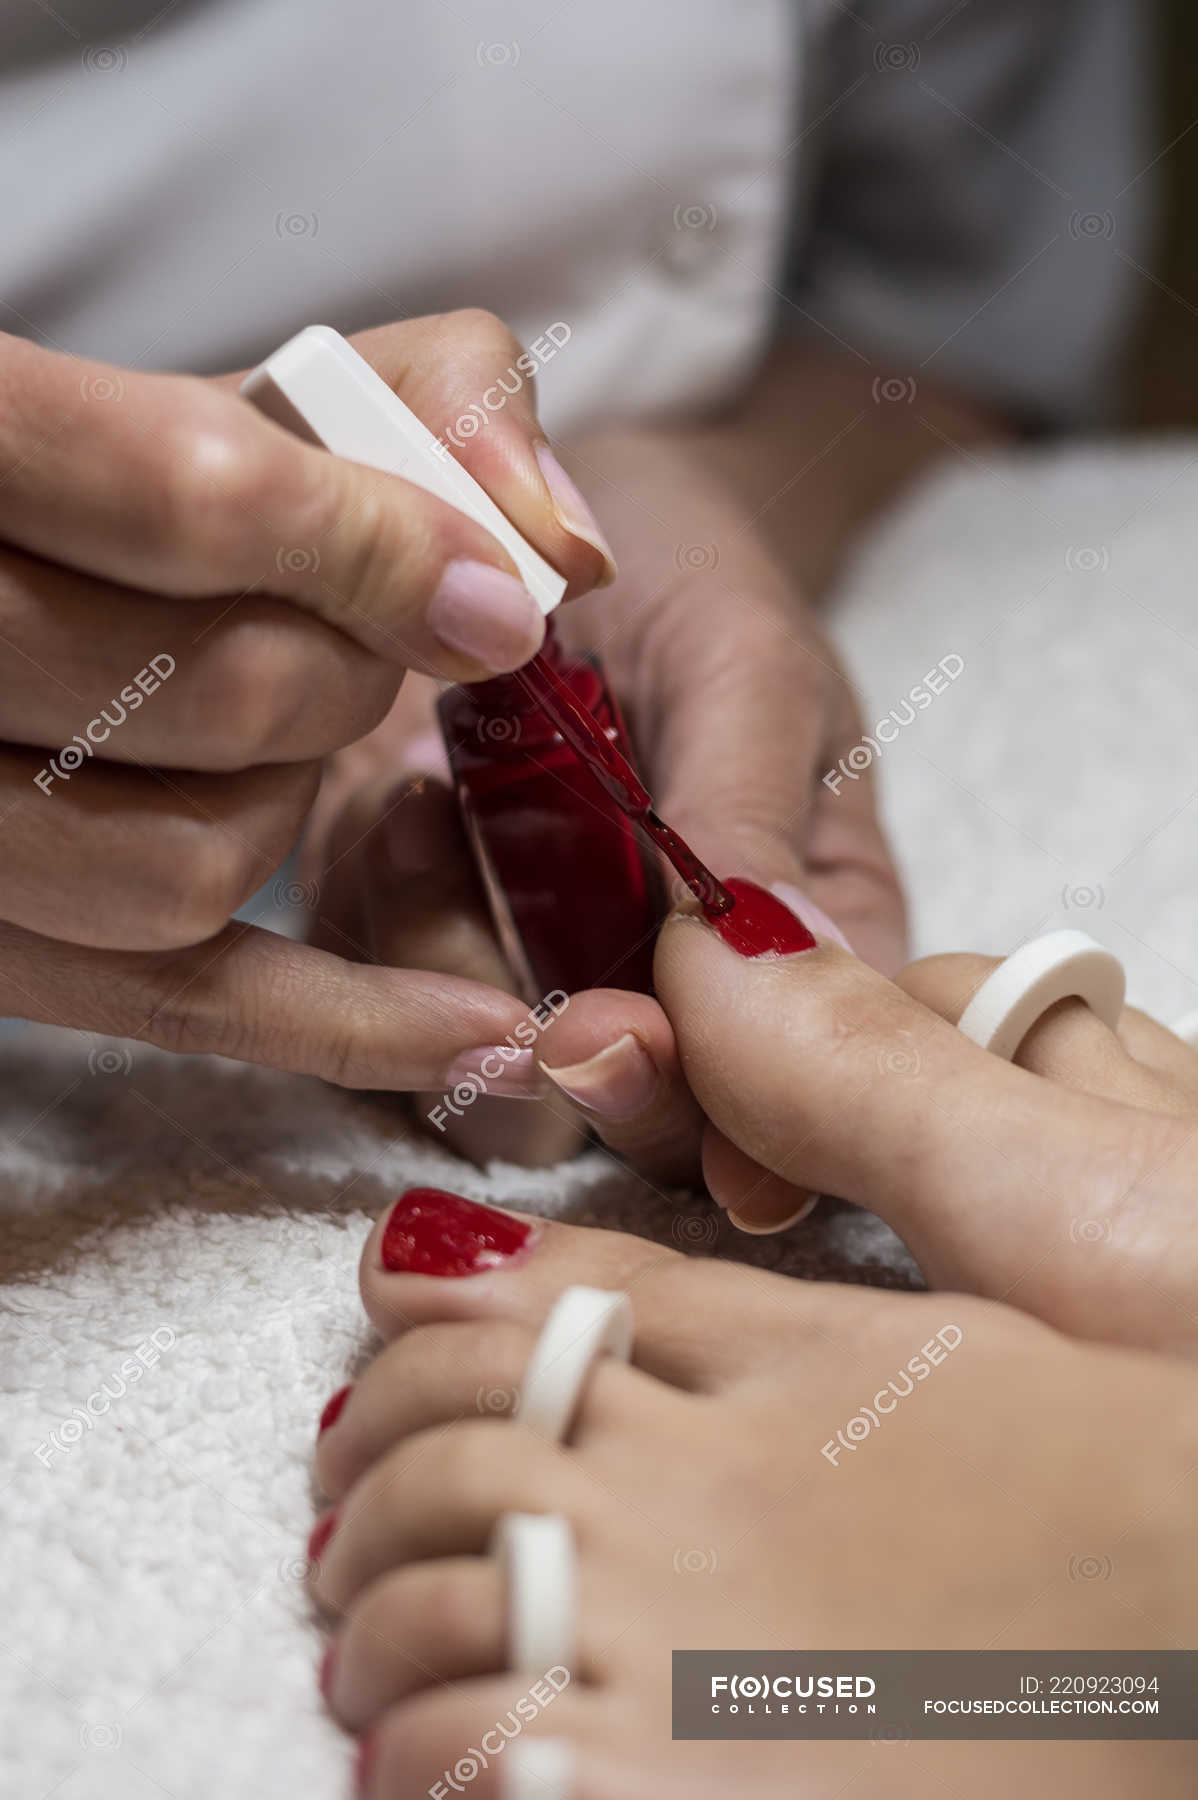 Female manicurist painting feet nails of client in beauty salon — close up,  wellness - Stock Photo | #220923094